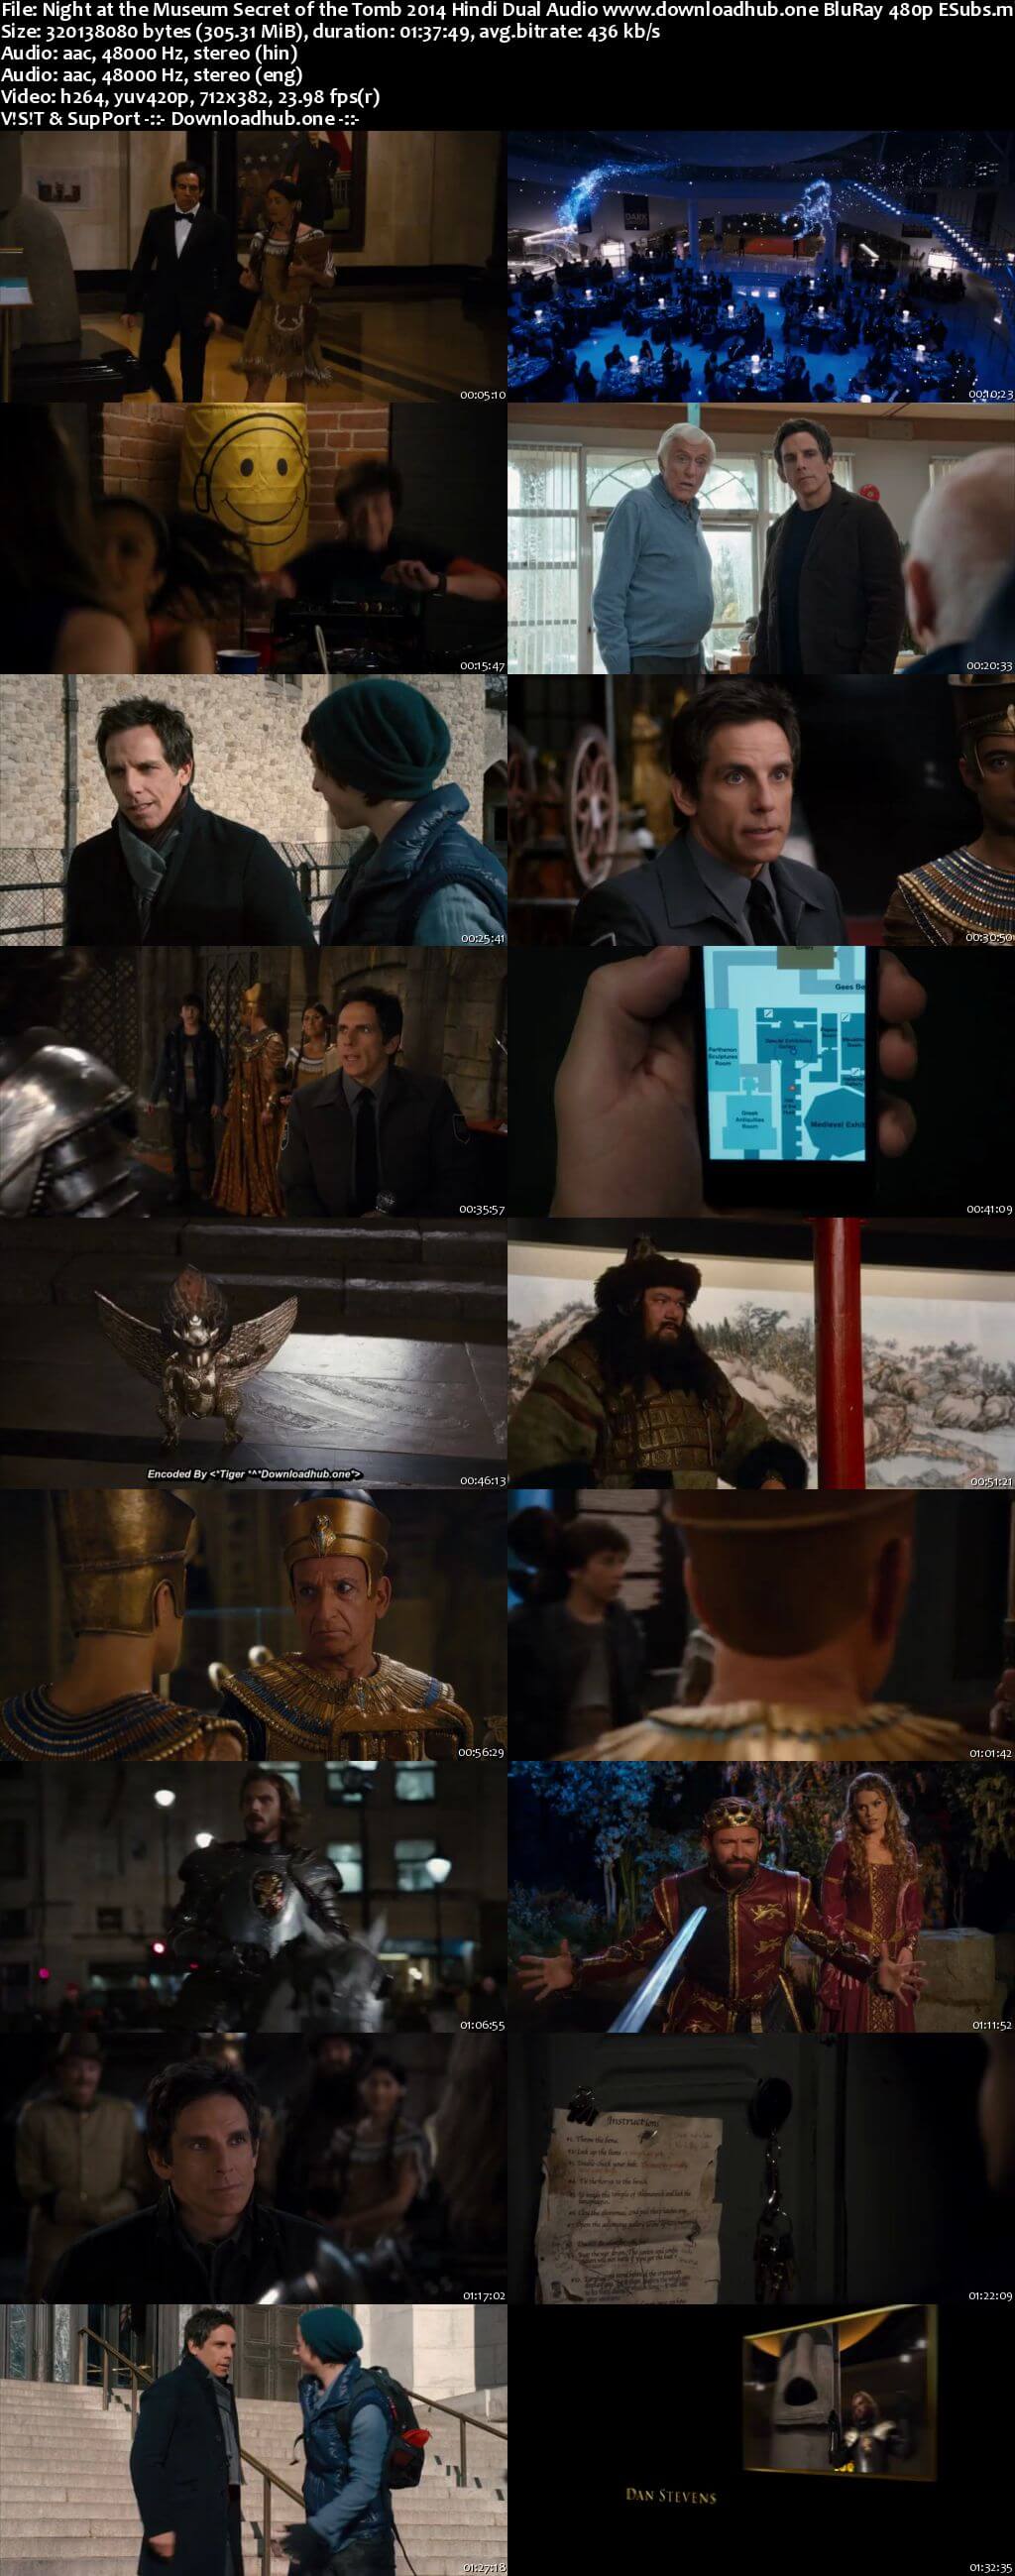 Night at the Museum Secret of the Tomb 2014 Hindi Dual Audio 300MB BluRay 480p ESubs